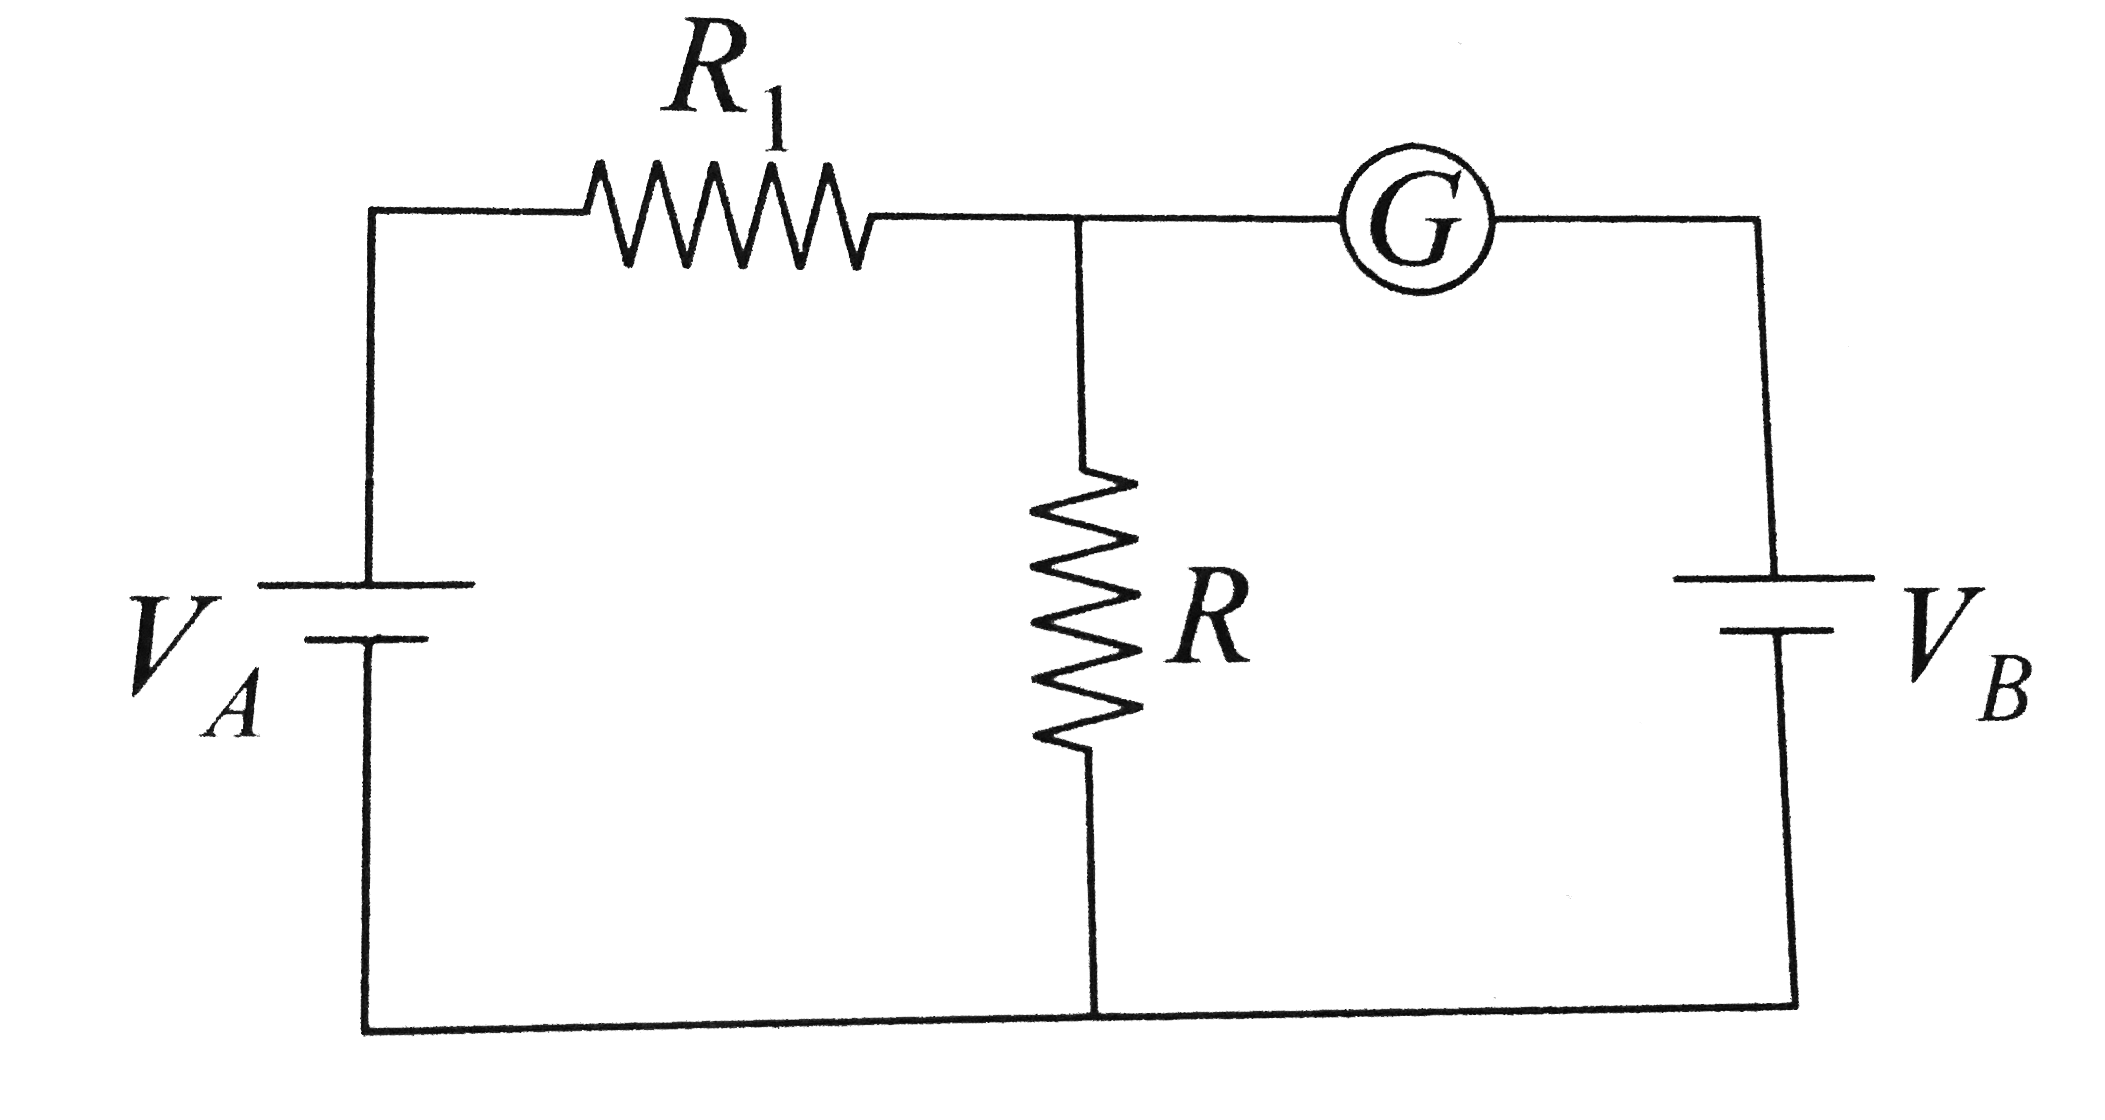 In the circuit shown the cells A and B have negligible resistance. For V(A) = 12 V, R(1) = 500 Omega and R = 100 Omega, the galvanometer (G) shows no deflection. The value of V(B) is